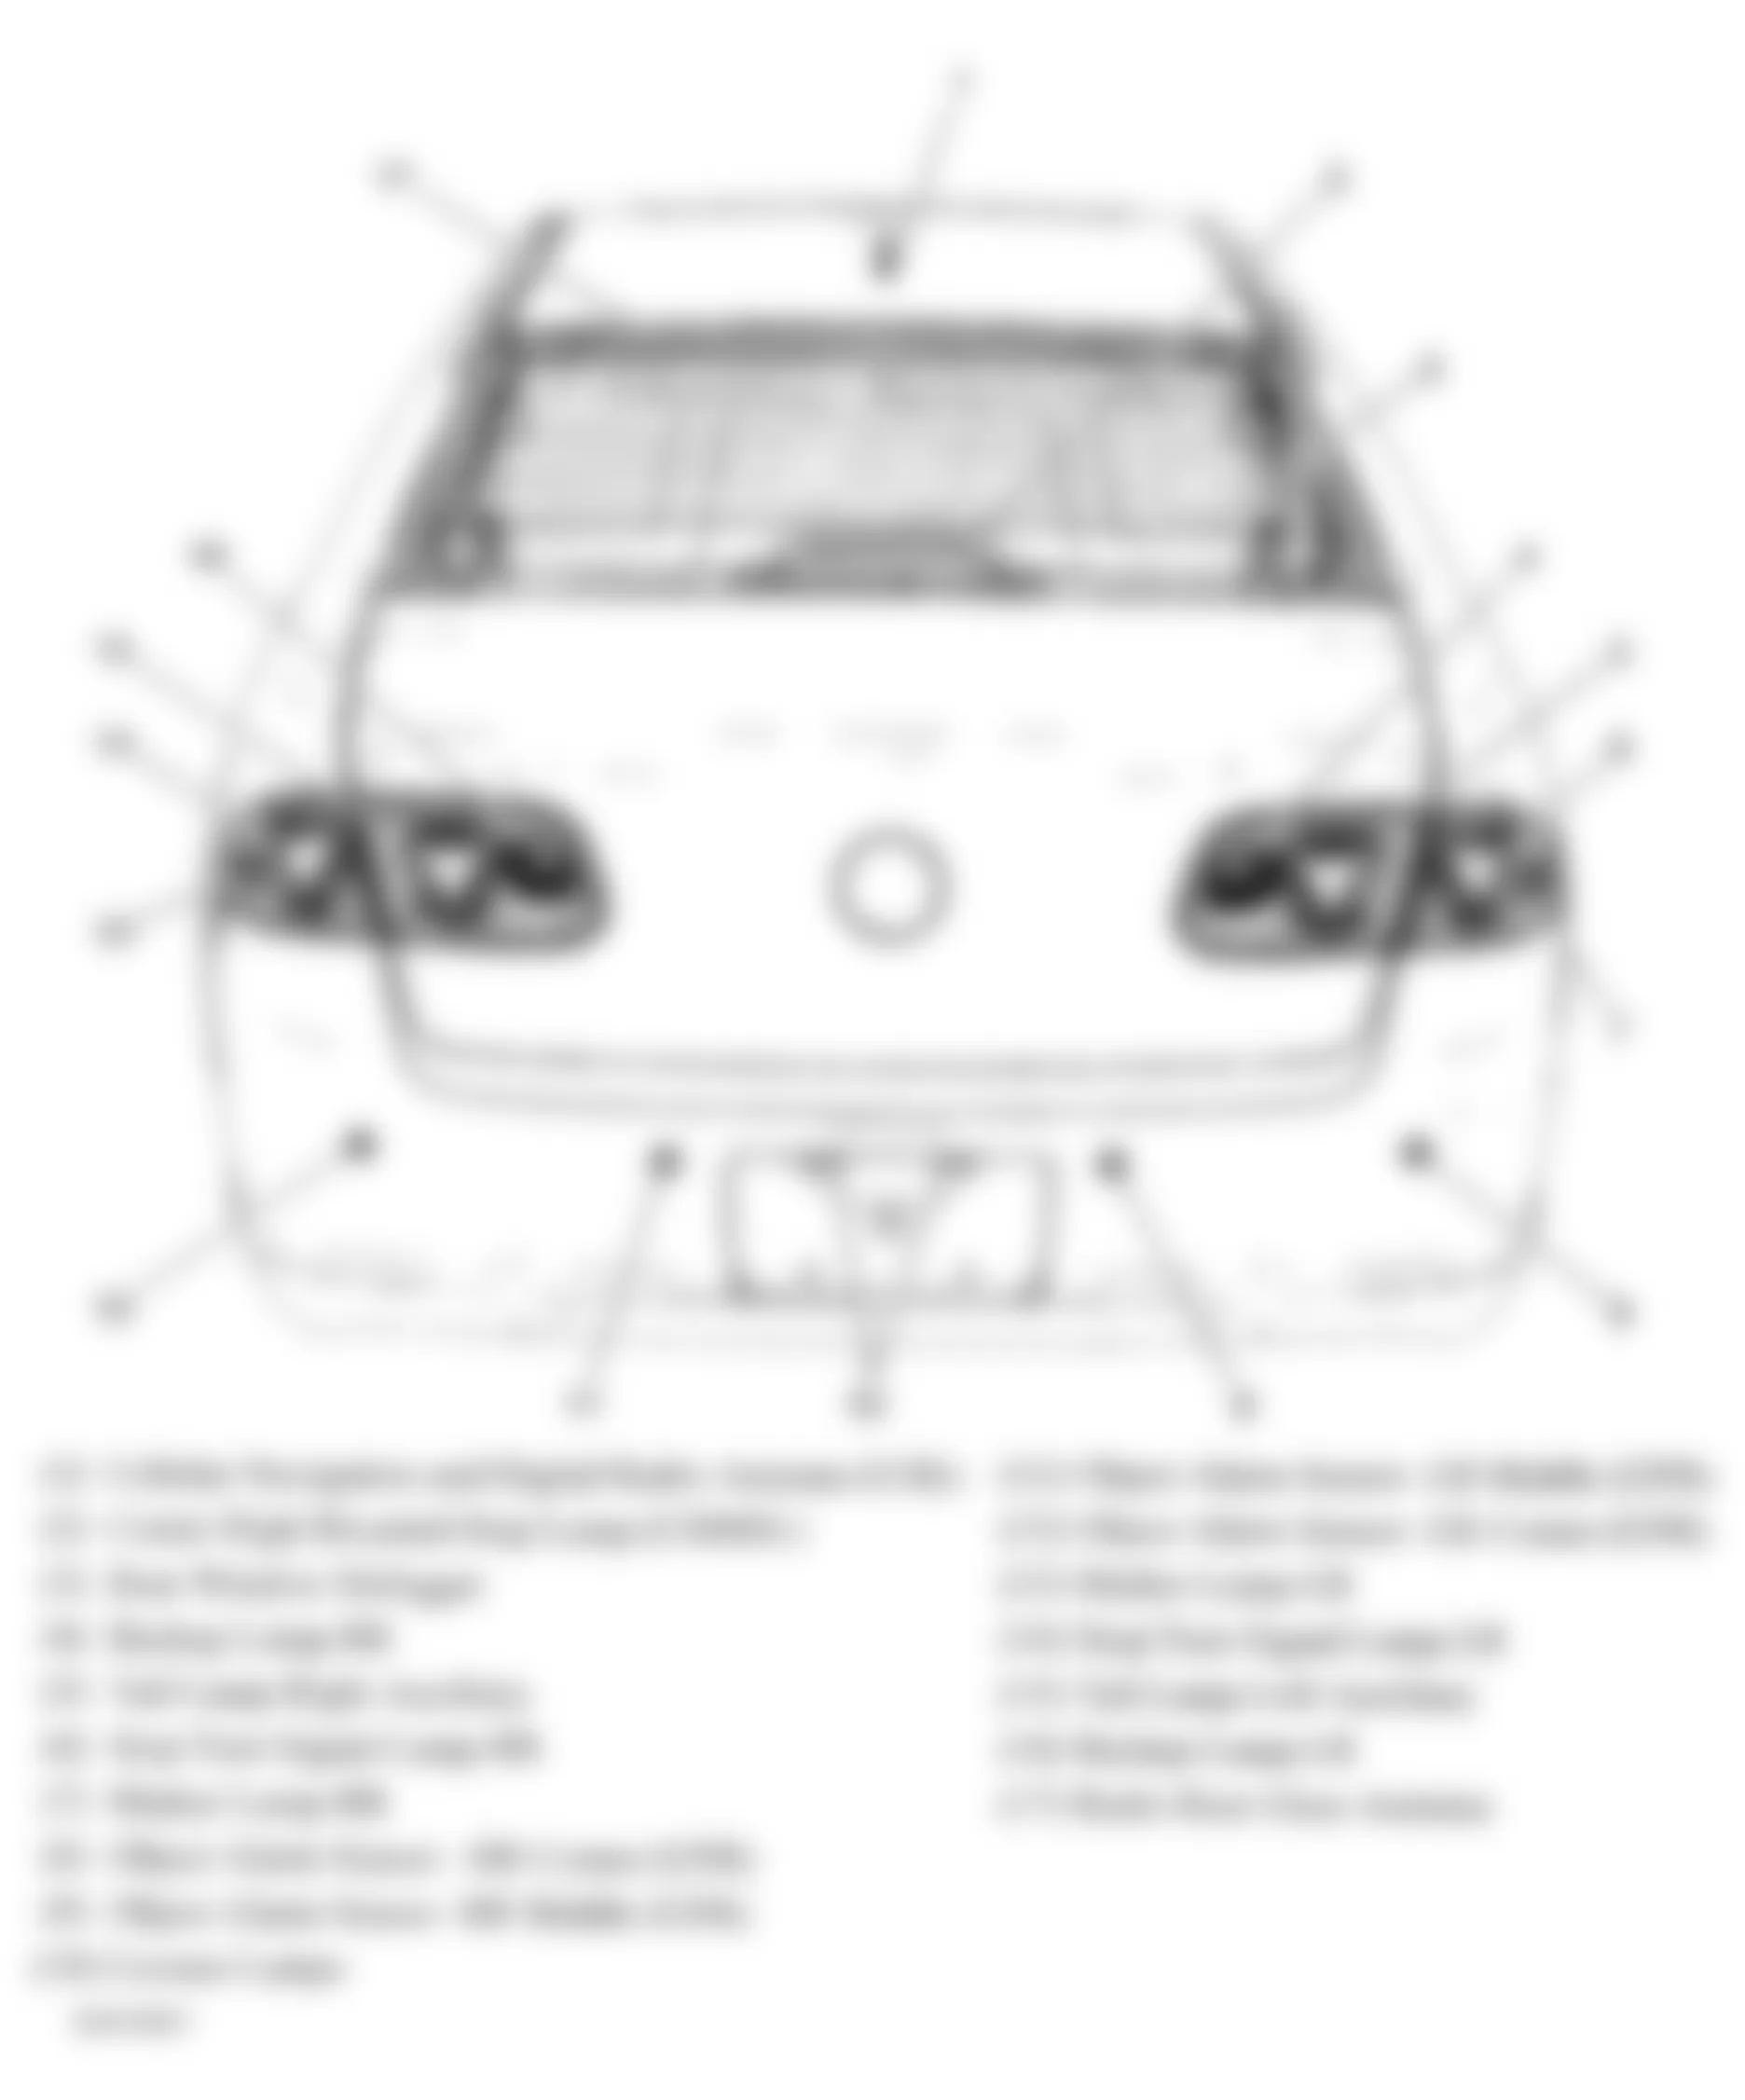 Buick Lucerne CX 2010 - Component Locations -  Rear Of Vehicle